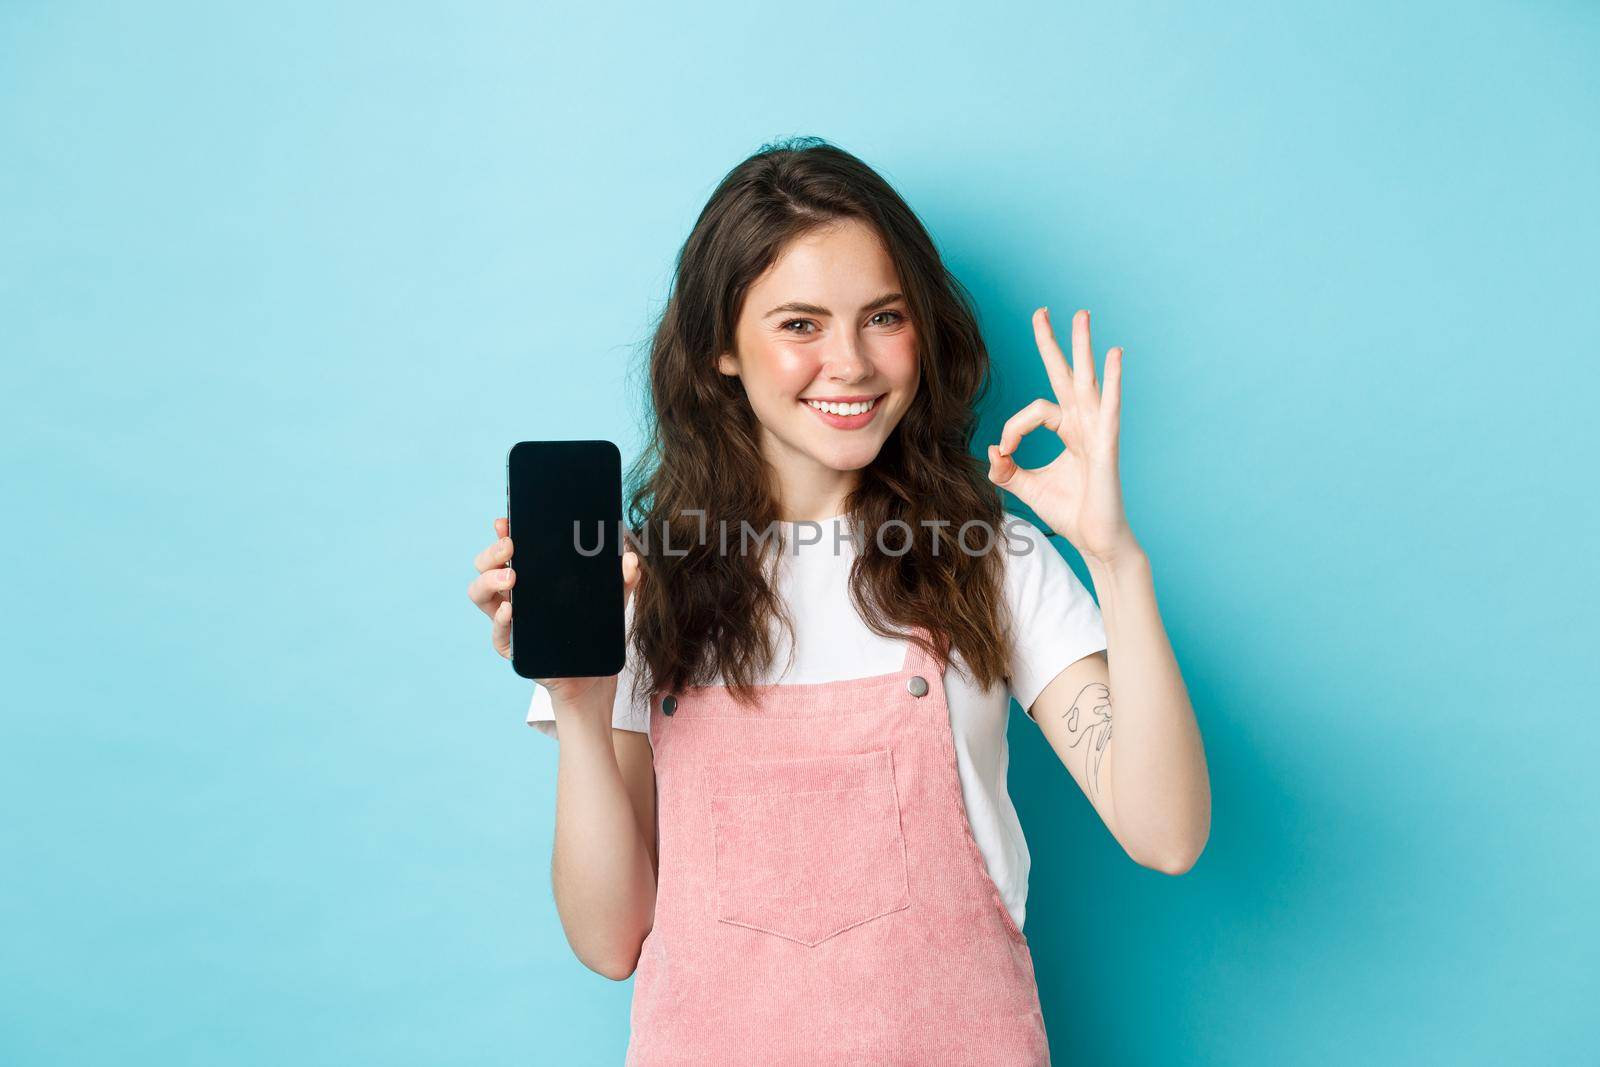 Portrait of modern stylish girl recommending online shop or mobile app, showing okay sign with empty smartphone screen, nod in approval, smiling satisfied, blue background.